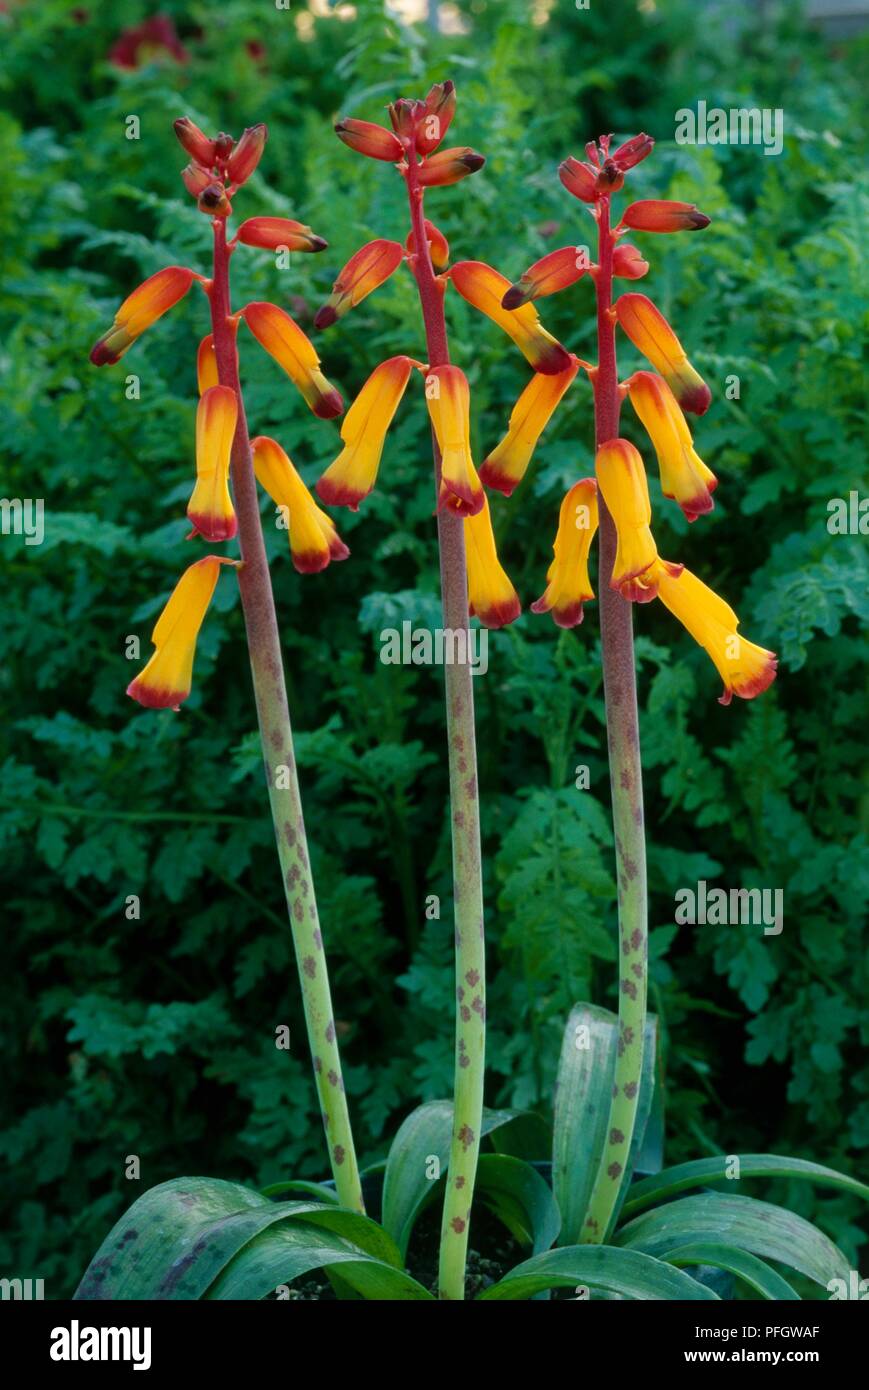 Lachenalia aloides (Cape Cowslip) with yellow and red flowers on tall stems Stock Photo